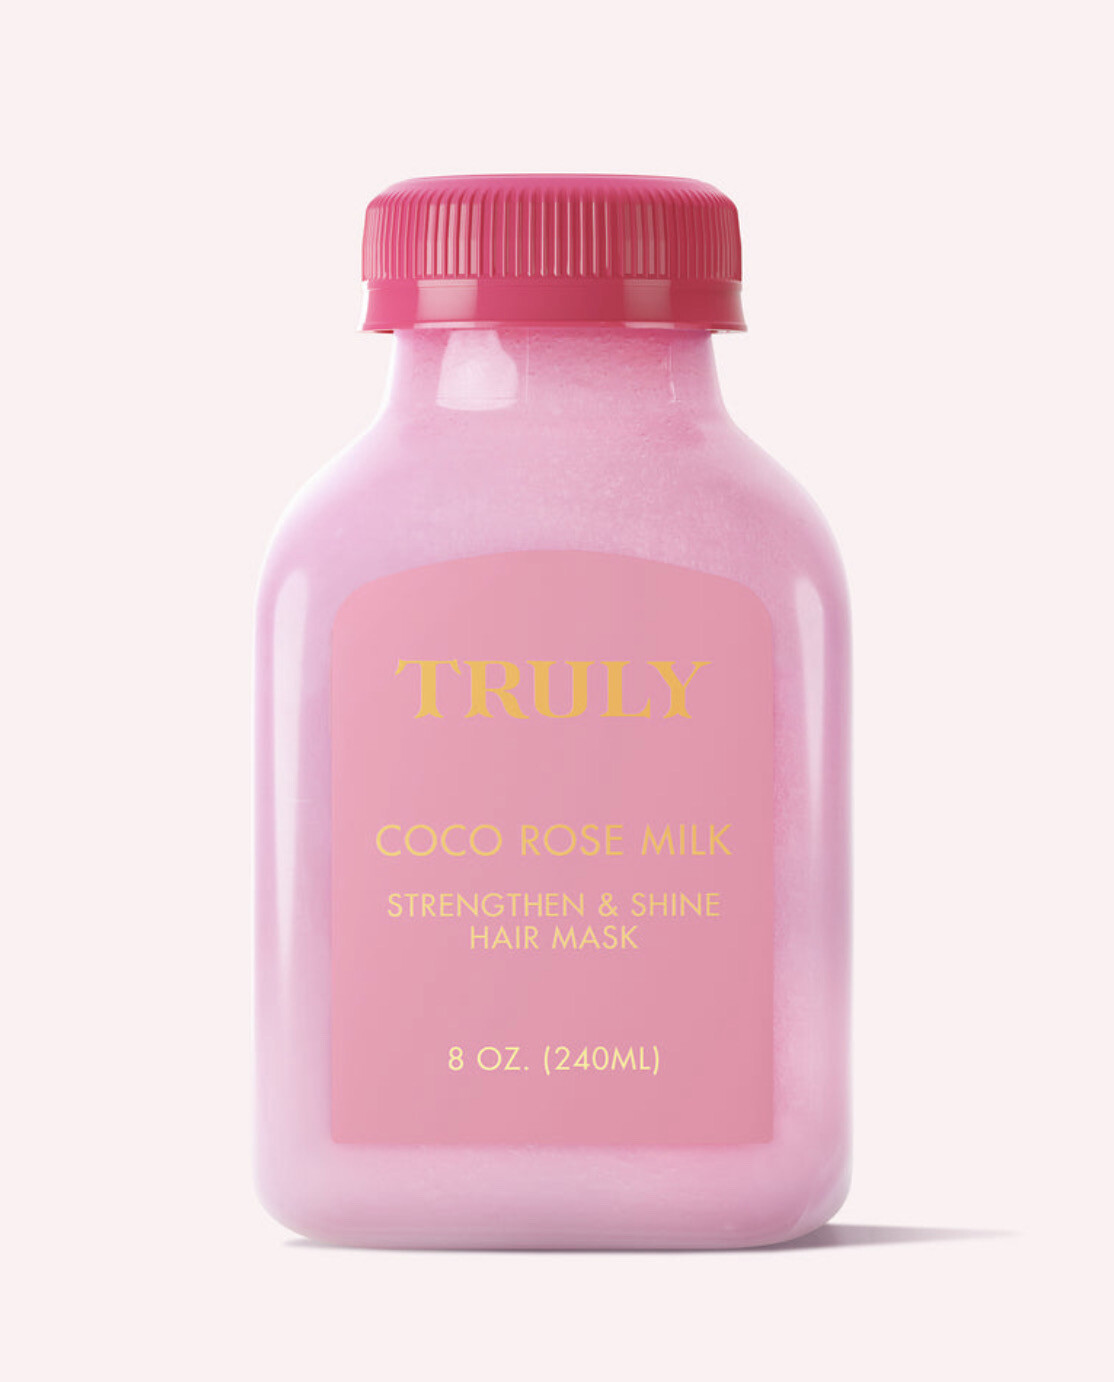 TRULY - Coco Rose Milk Hair Mask